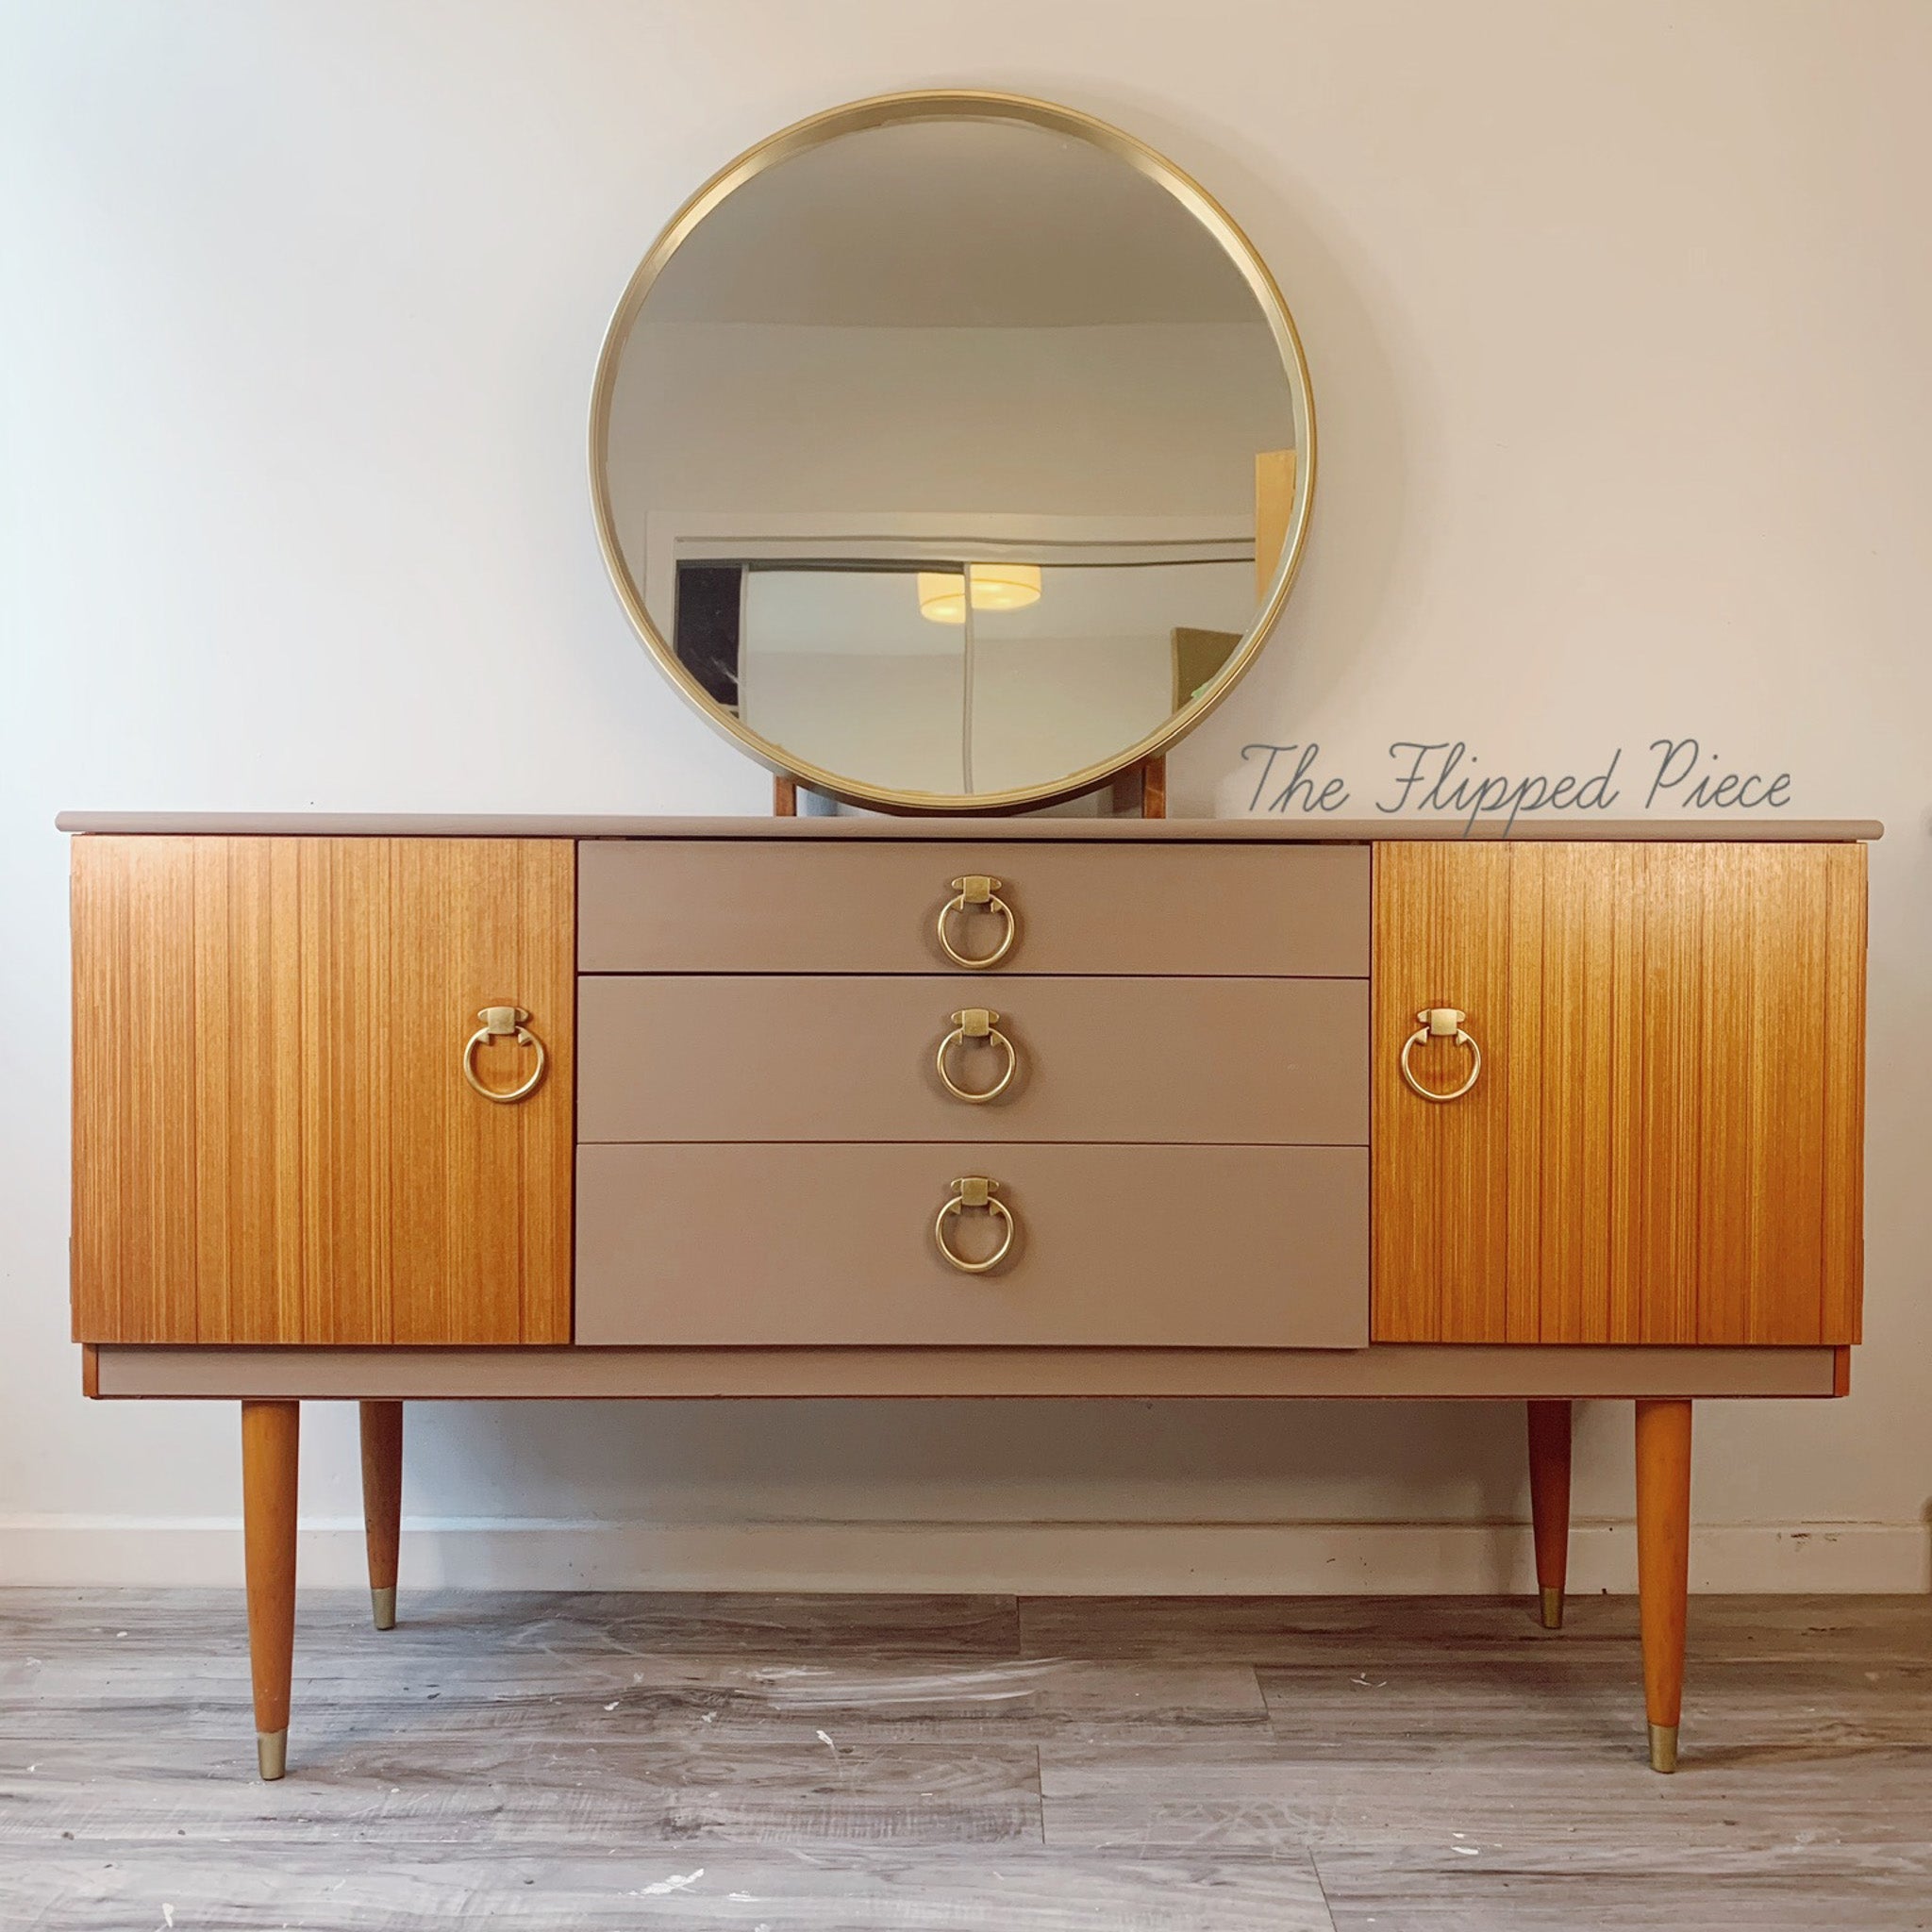 A mid-century dresser refurbished by The Flipped Piece is painted in Dixie Belle's Mud Puddle chalk mineral paint and has 2 doors and legs in natural wood.